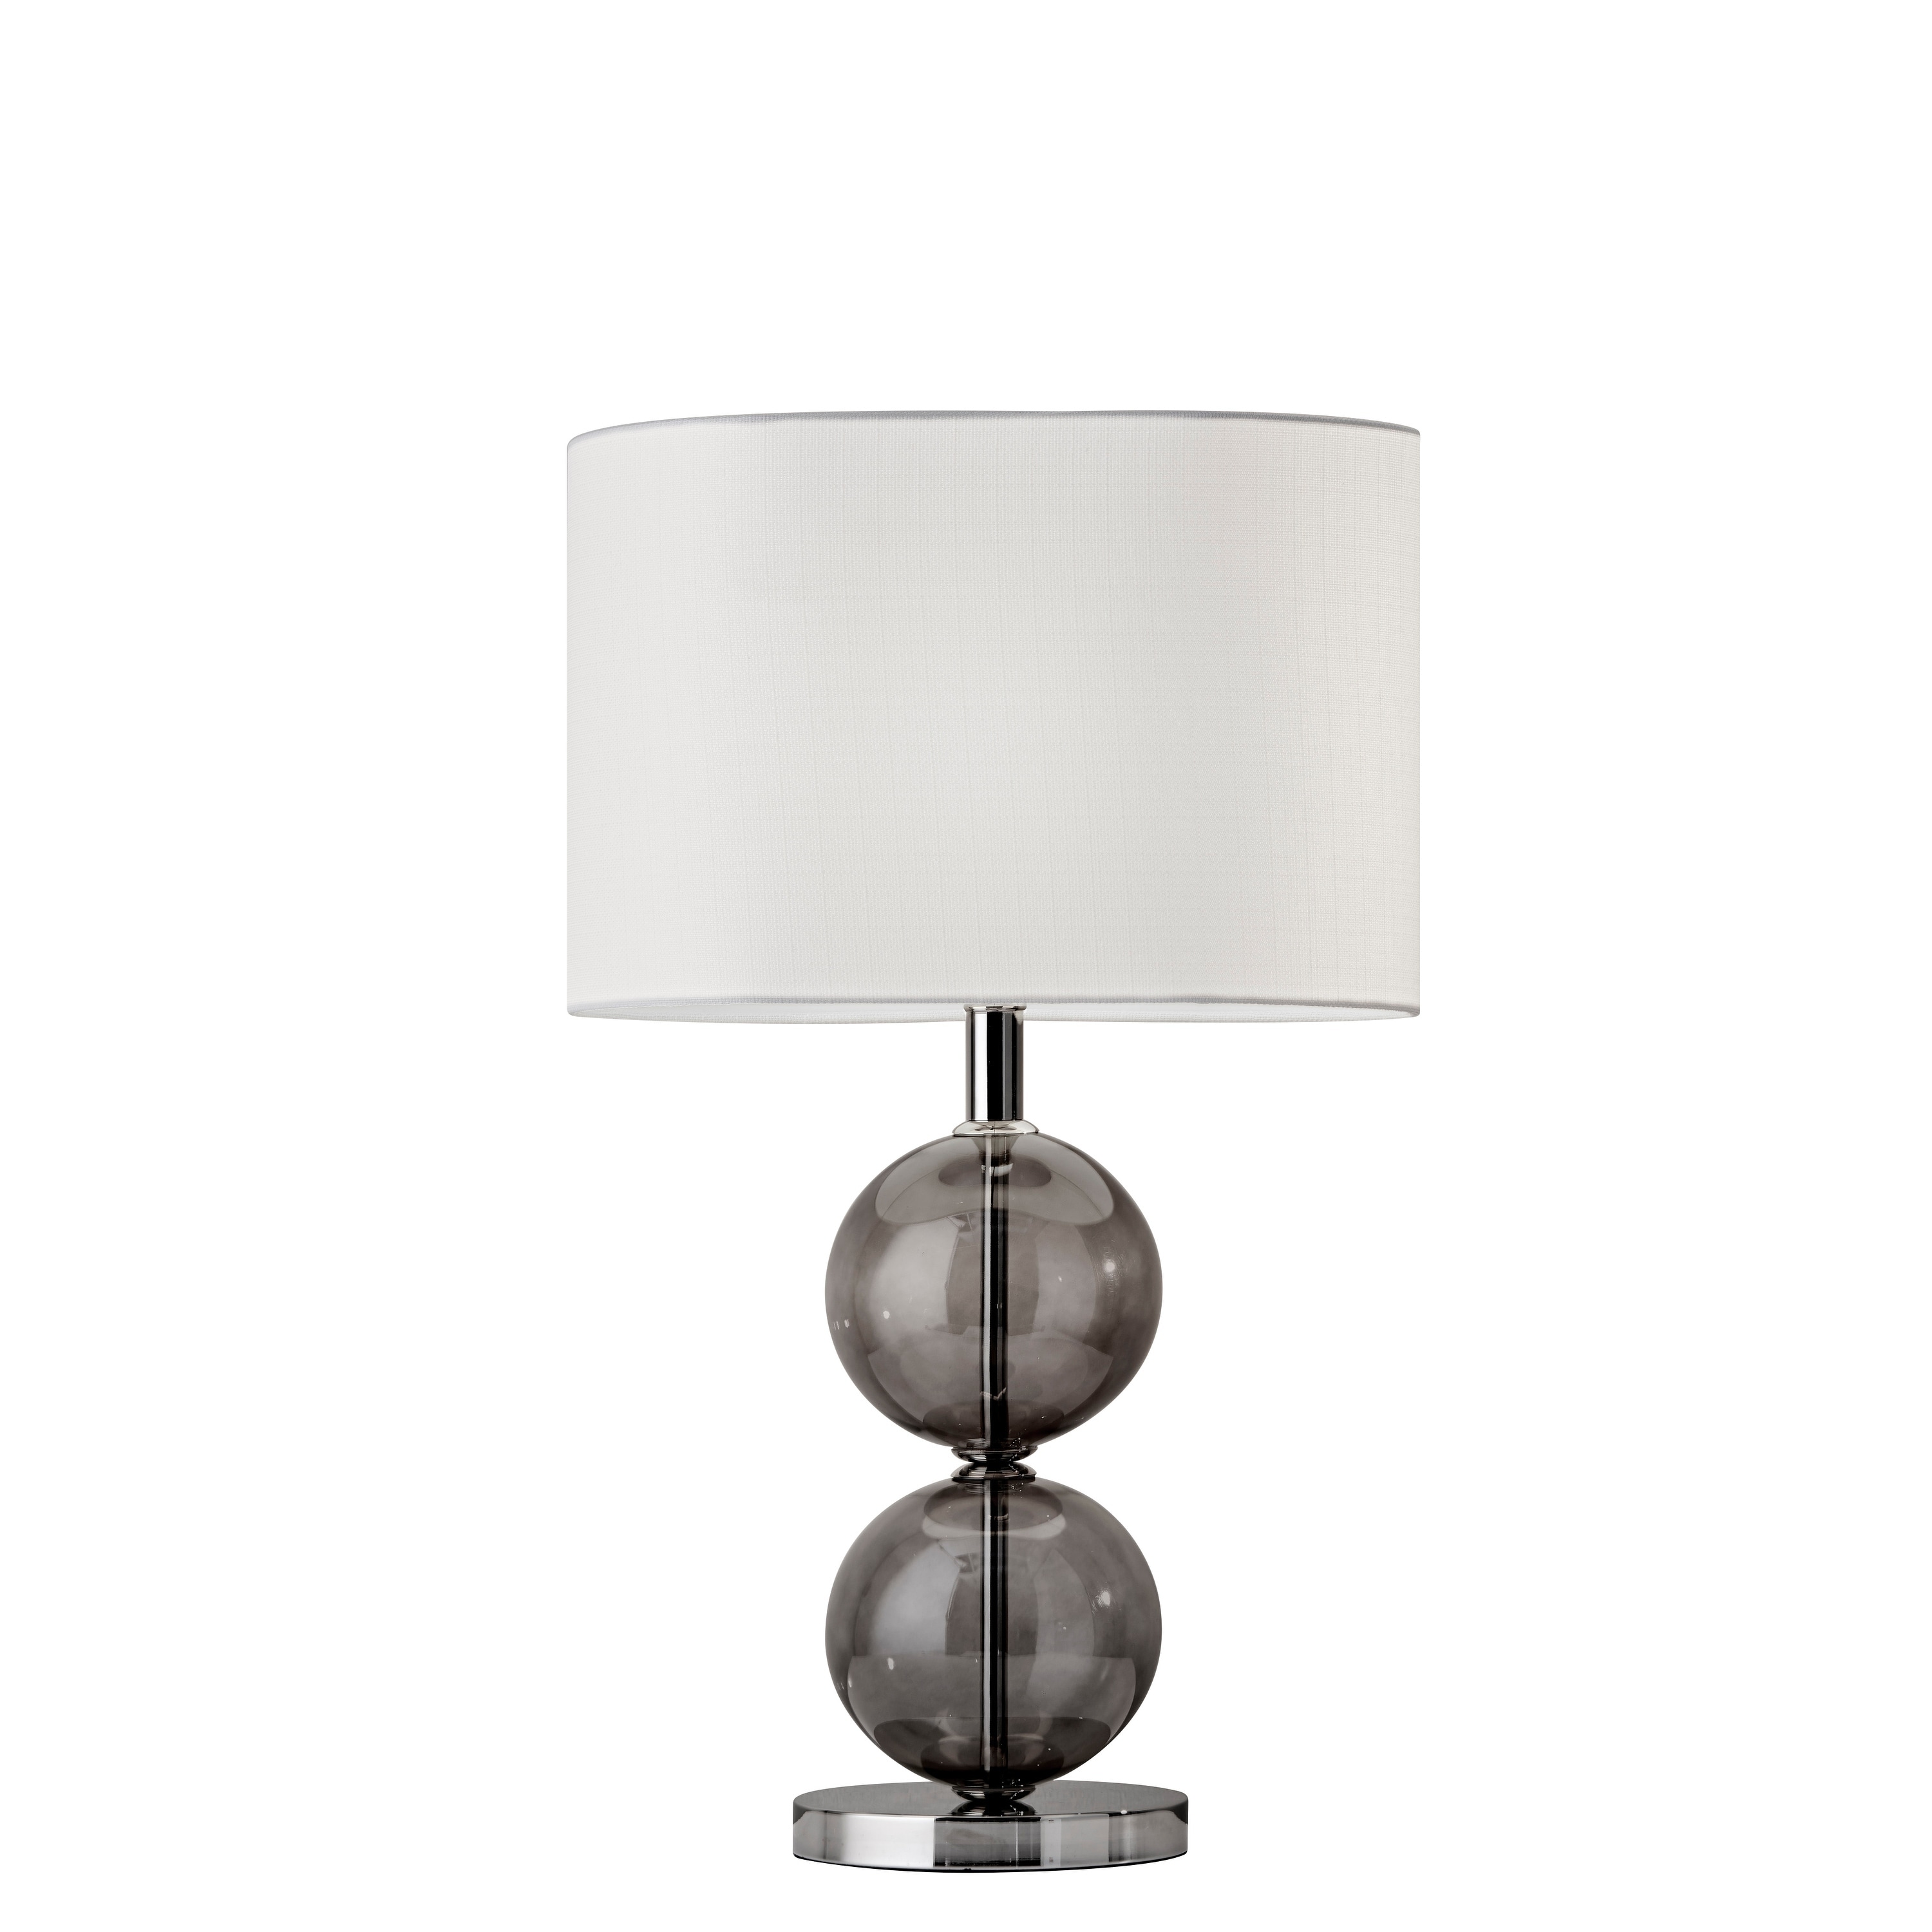 Shop Adesso Donna Tall Table Lamp Overstock 21121255